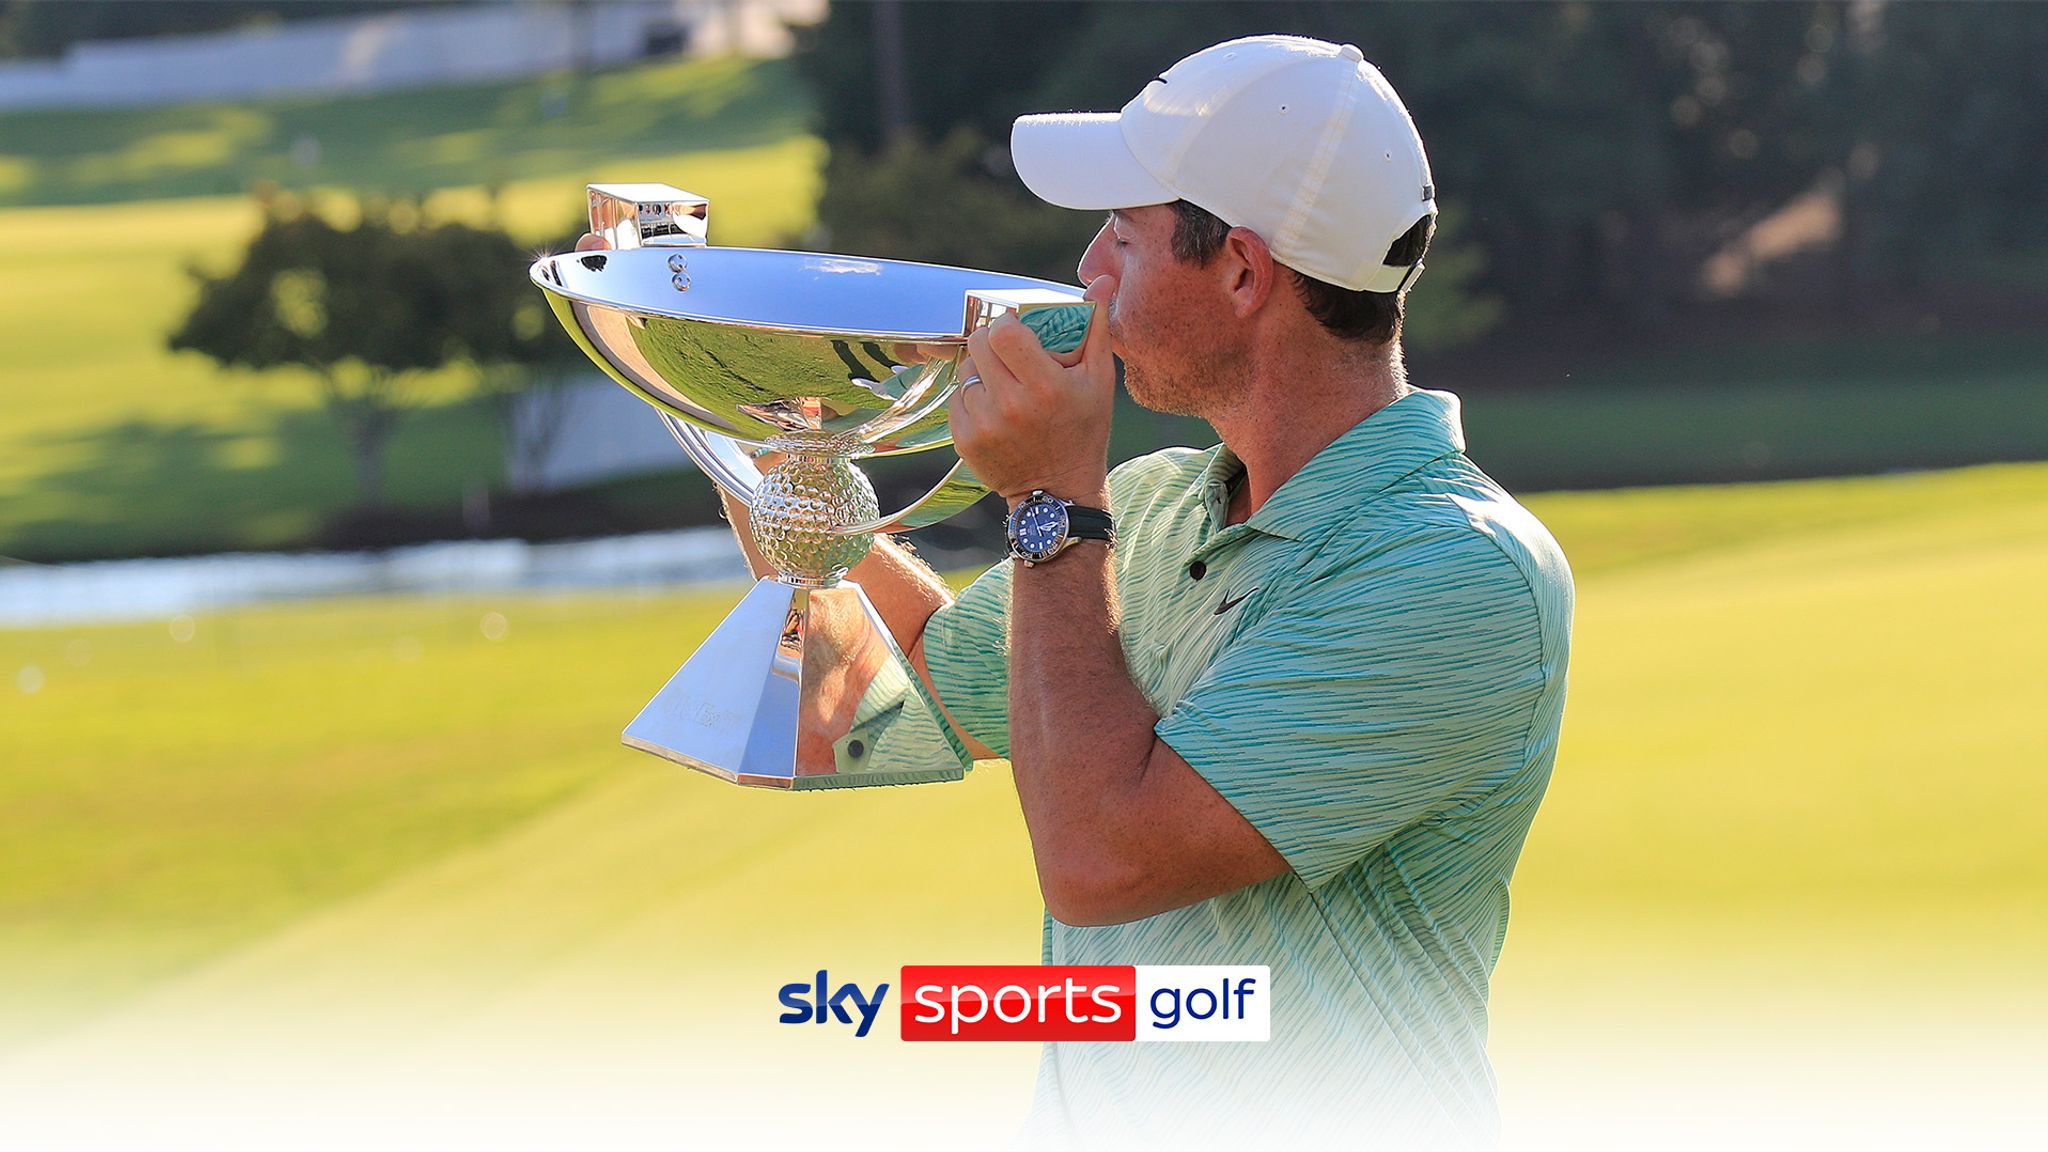 Can Rory McIlroy grab more FedEx Cup glory? Watch live on Sky Sports Video Watch TV Show Sky Sports